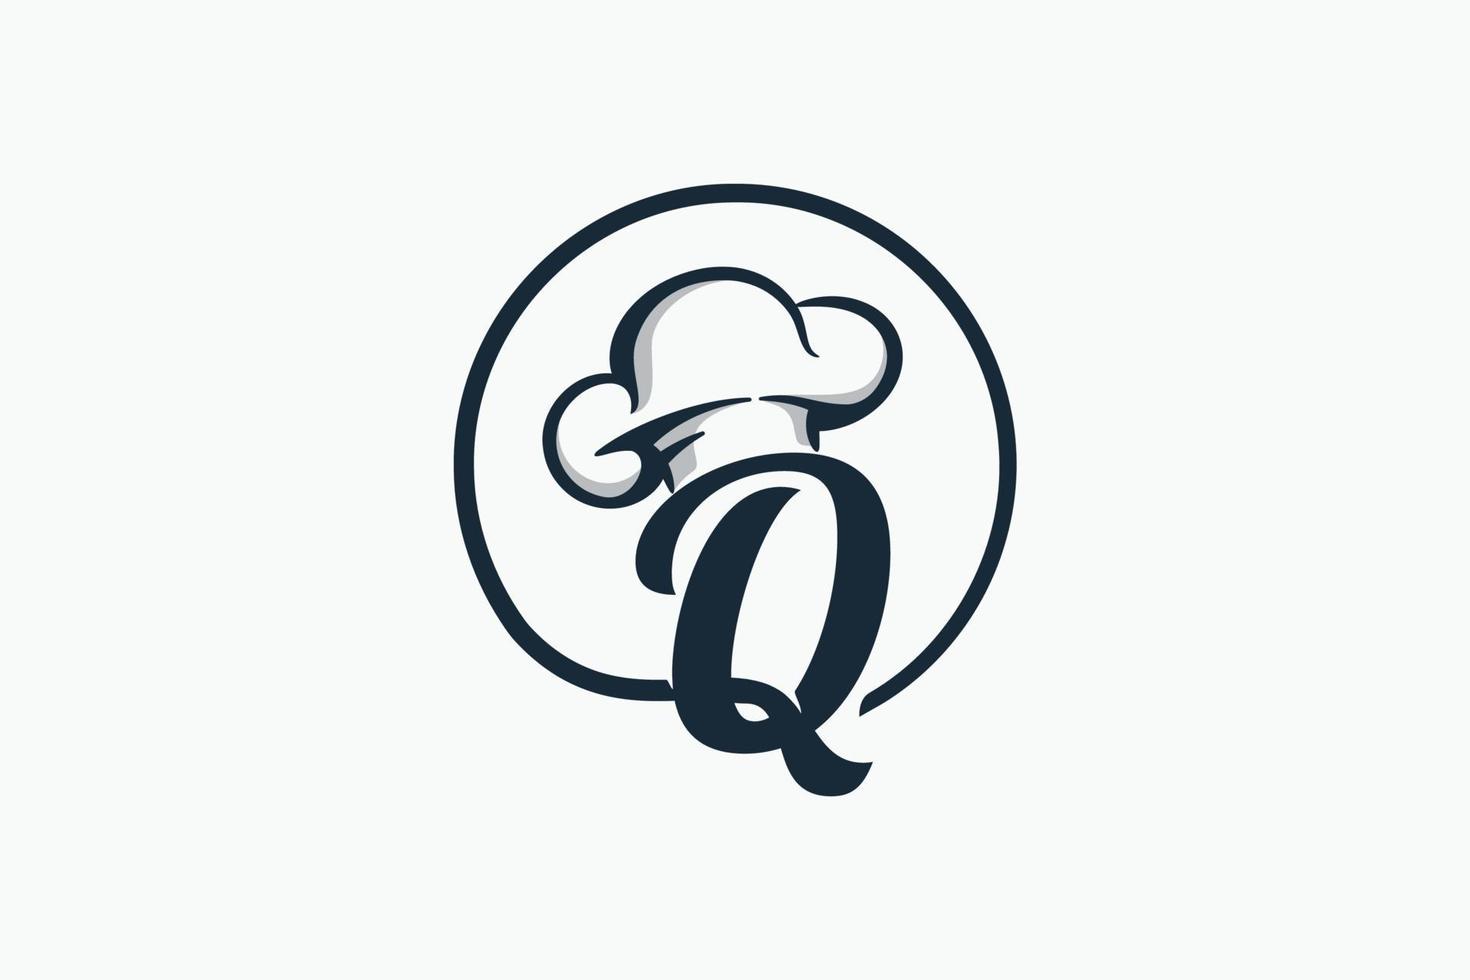 chef logo with a combination of letter q and chef hat for any business especially for restaurant, cafe, catering, etc. vector